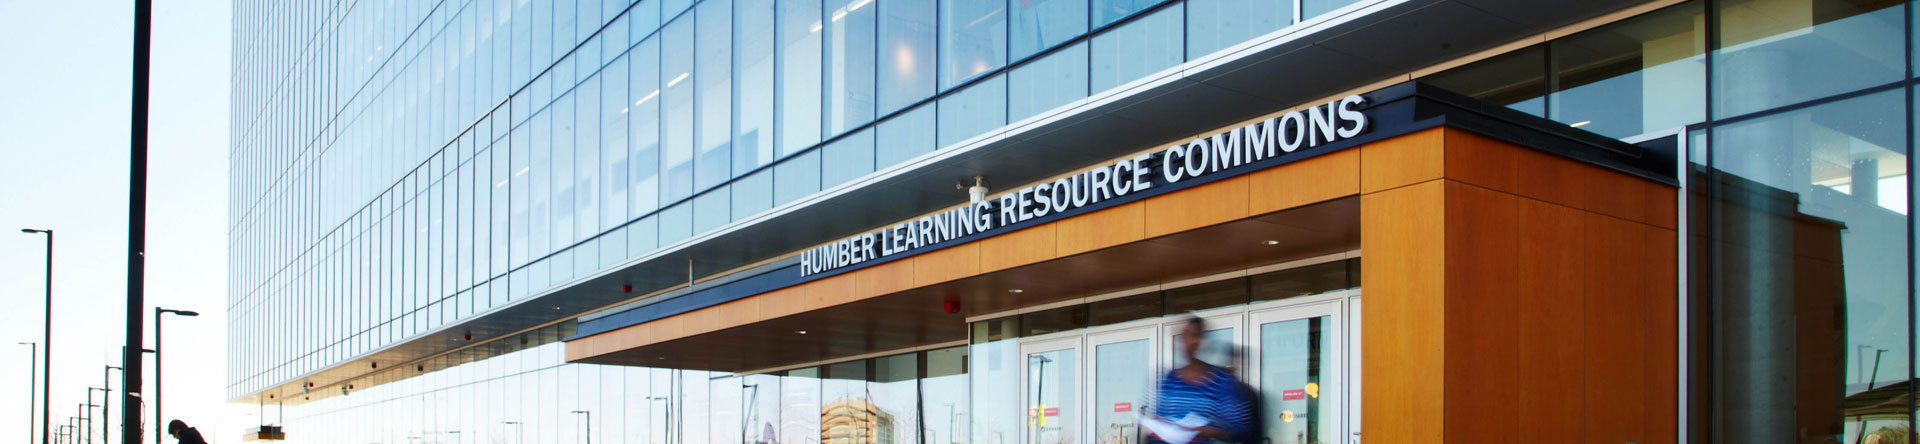 Humber learning commons entrance